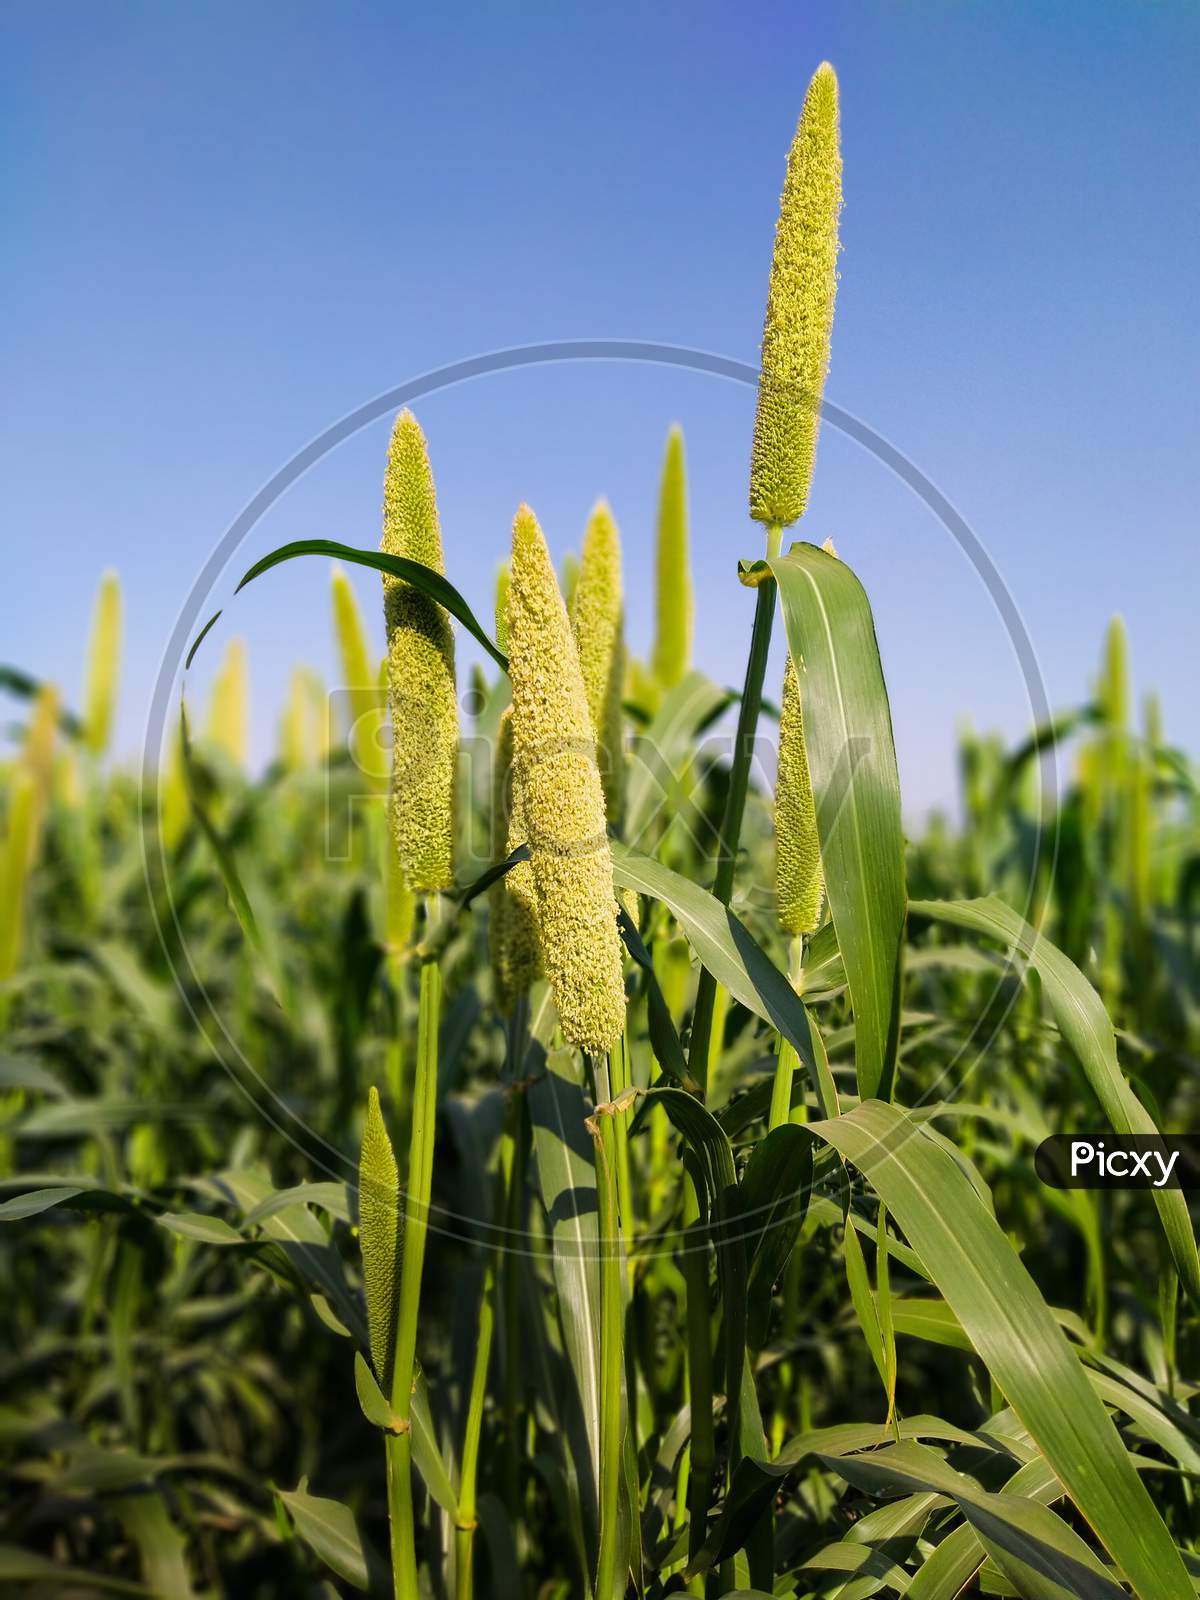 05 april 2020, gujrat india;- A beautiful photo of a grain millet planted in a field with a blue sky background